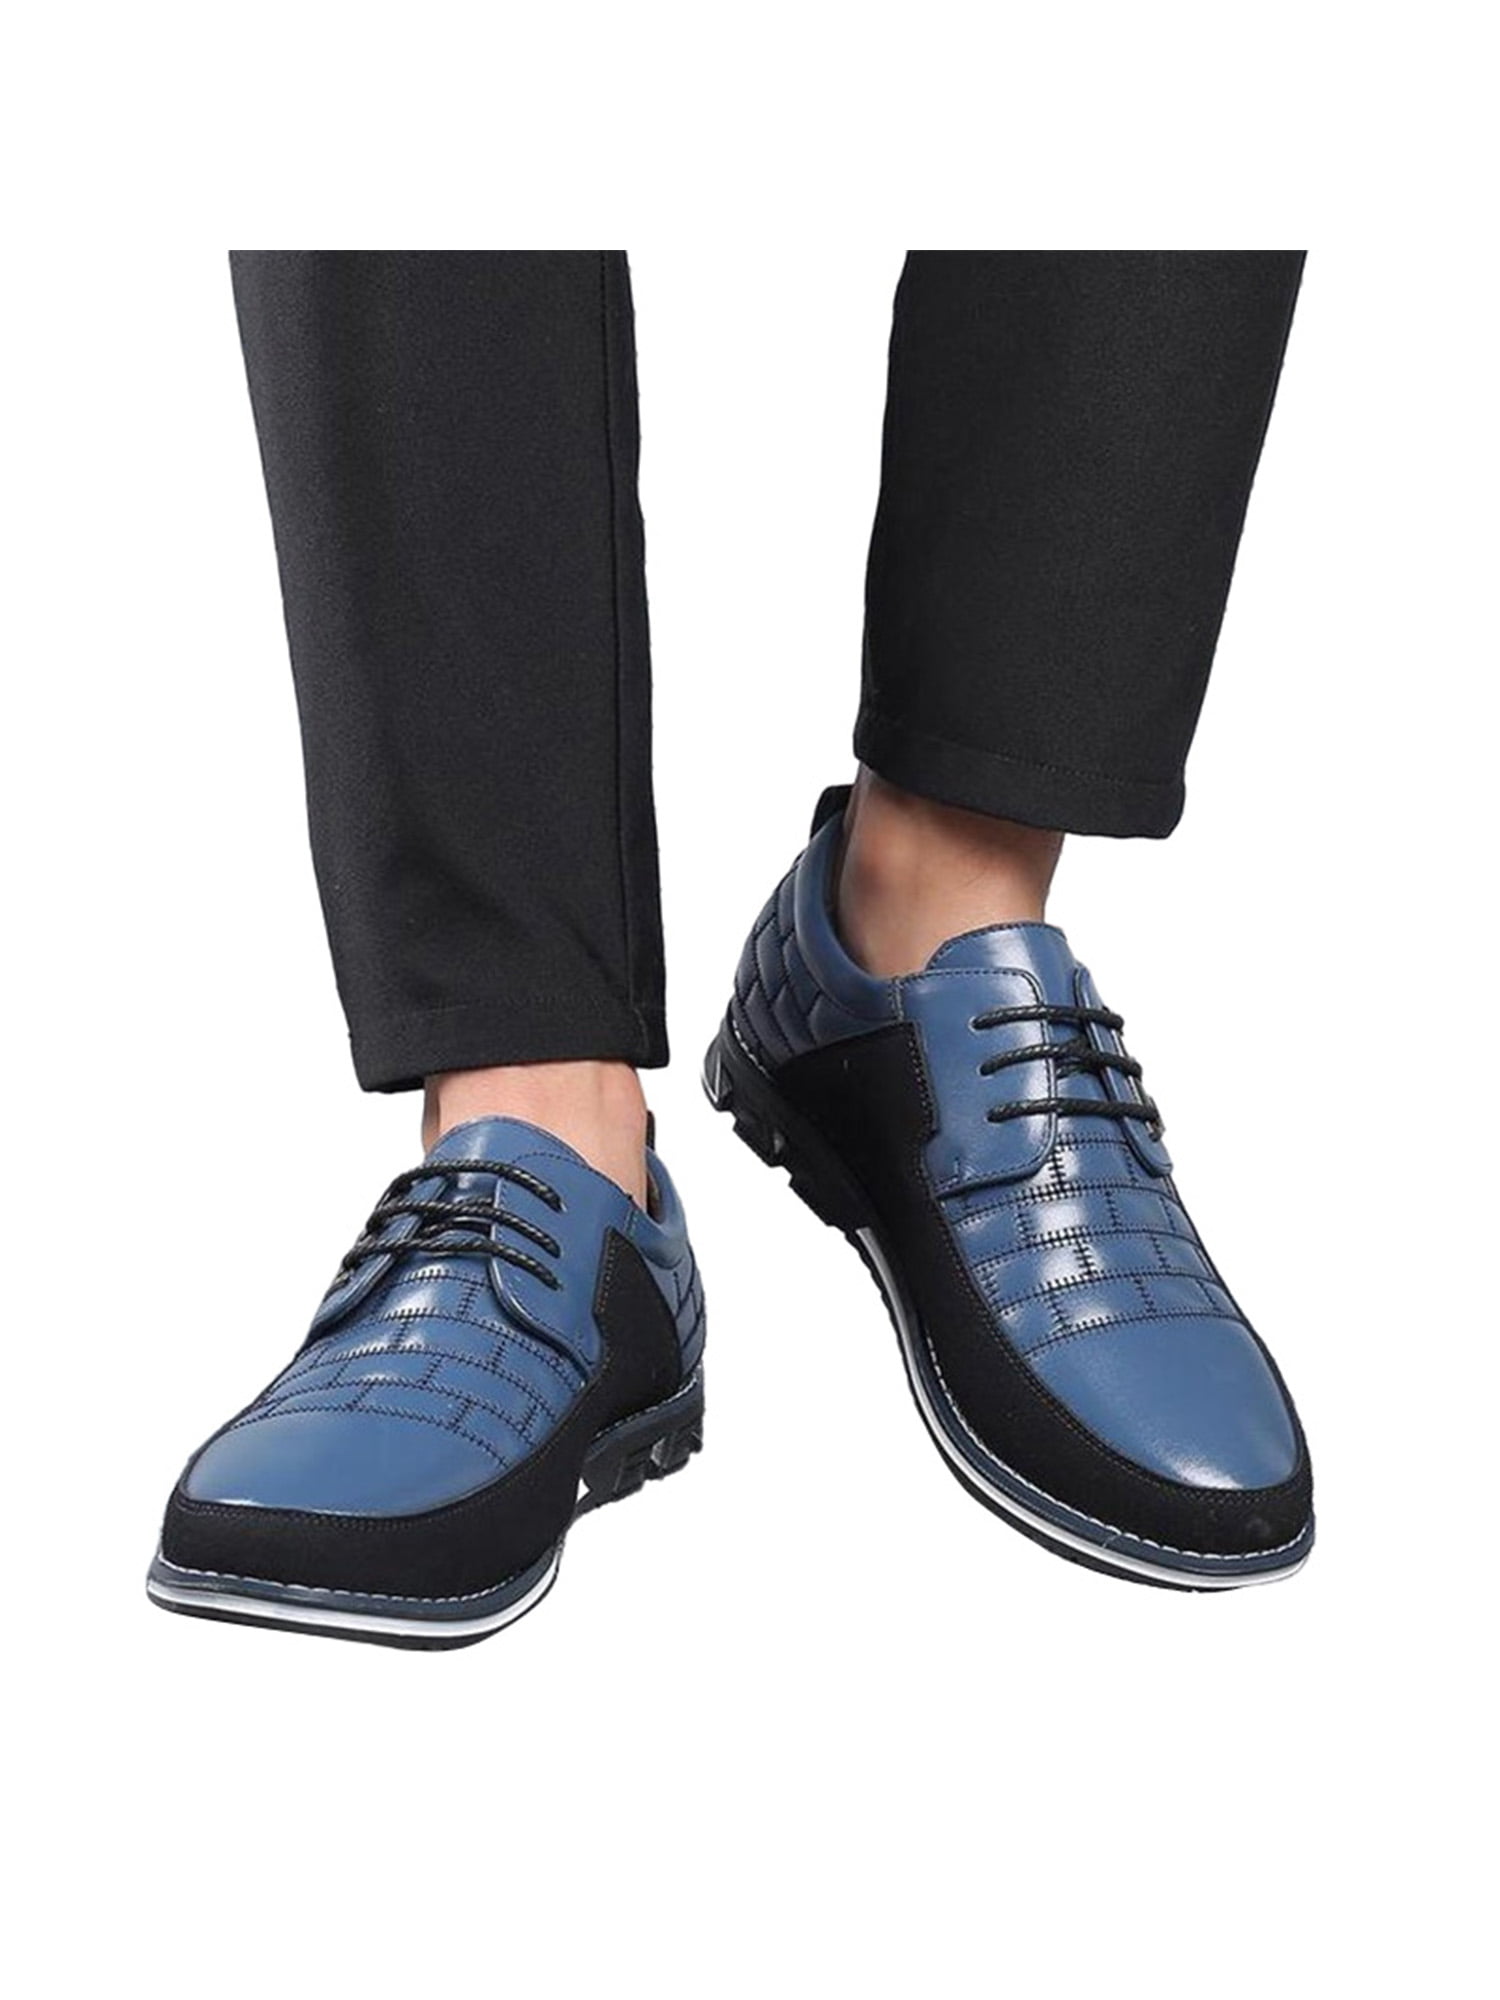 Spring Fall Leather Shoes Driving Shoes Lazy Shoes Light Soles Comfort Loafers & Slip-ONS Walking Shoes Business Shoes Mens Casual Shoes 